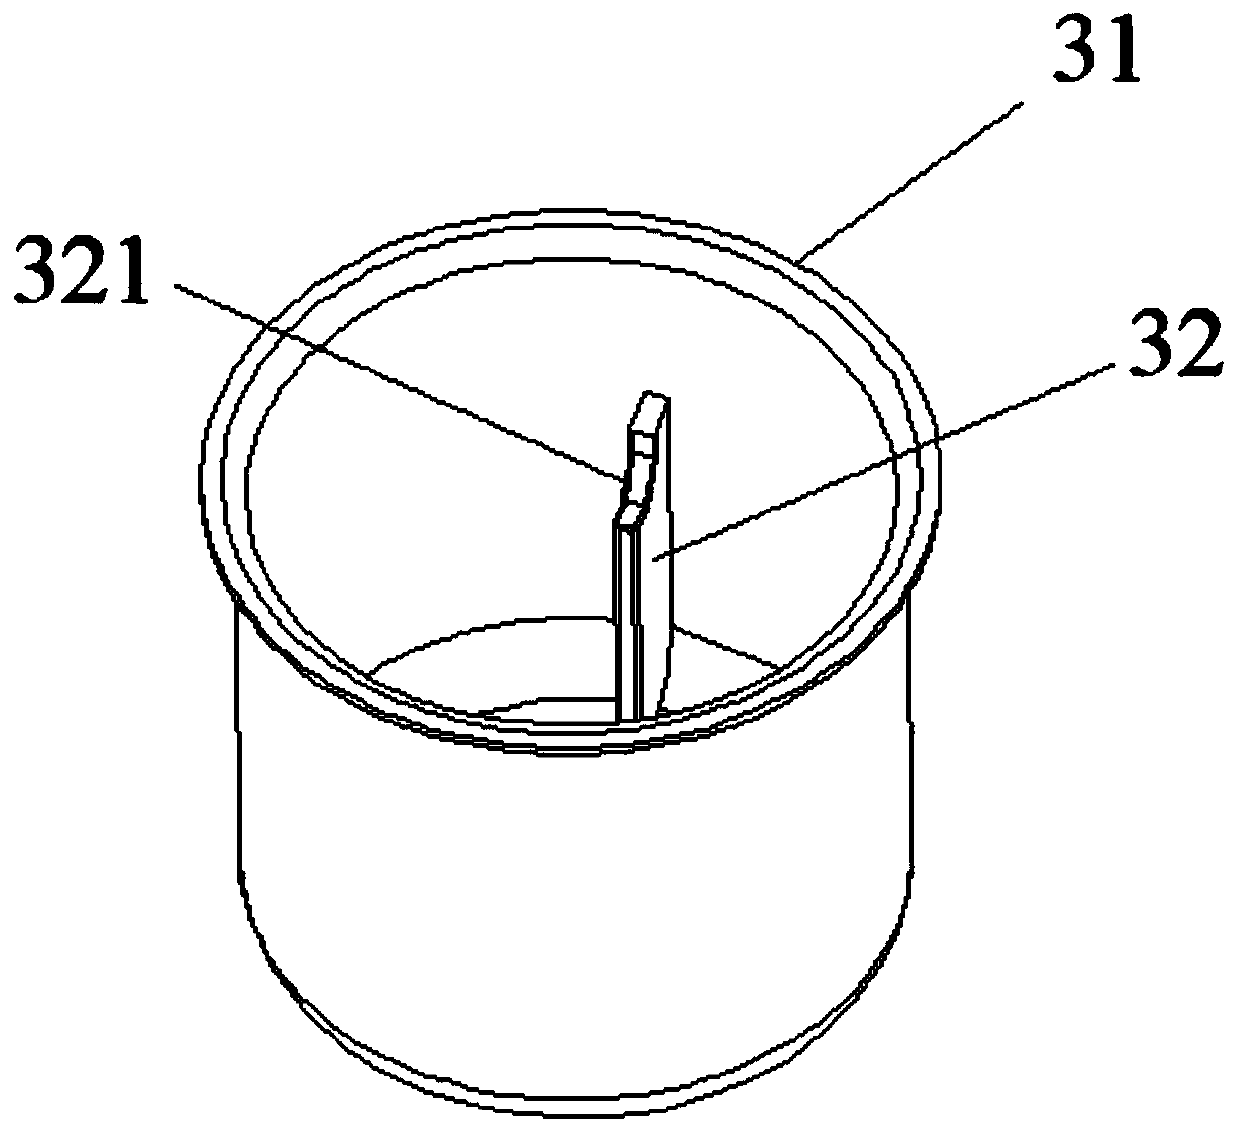 Cooker container structure and pressure cooker